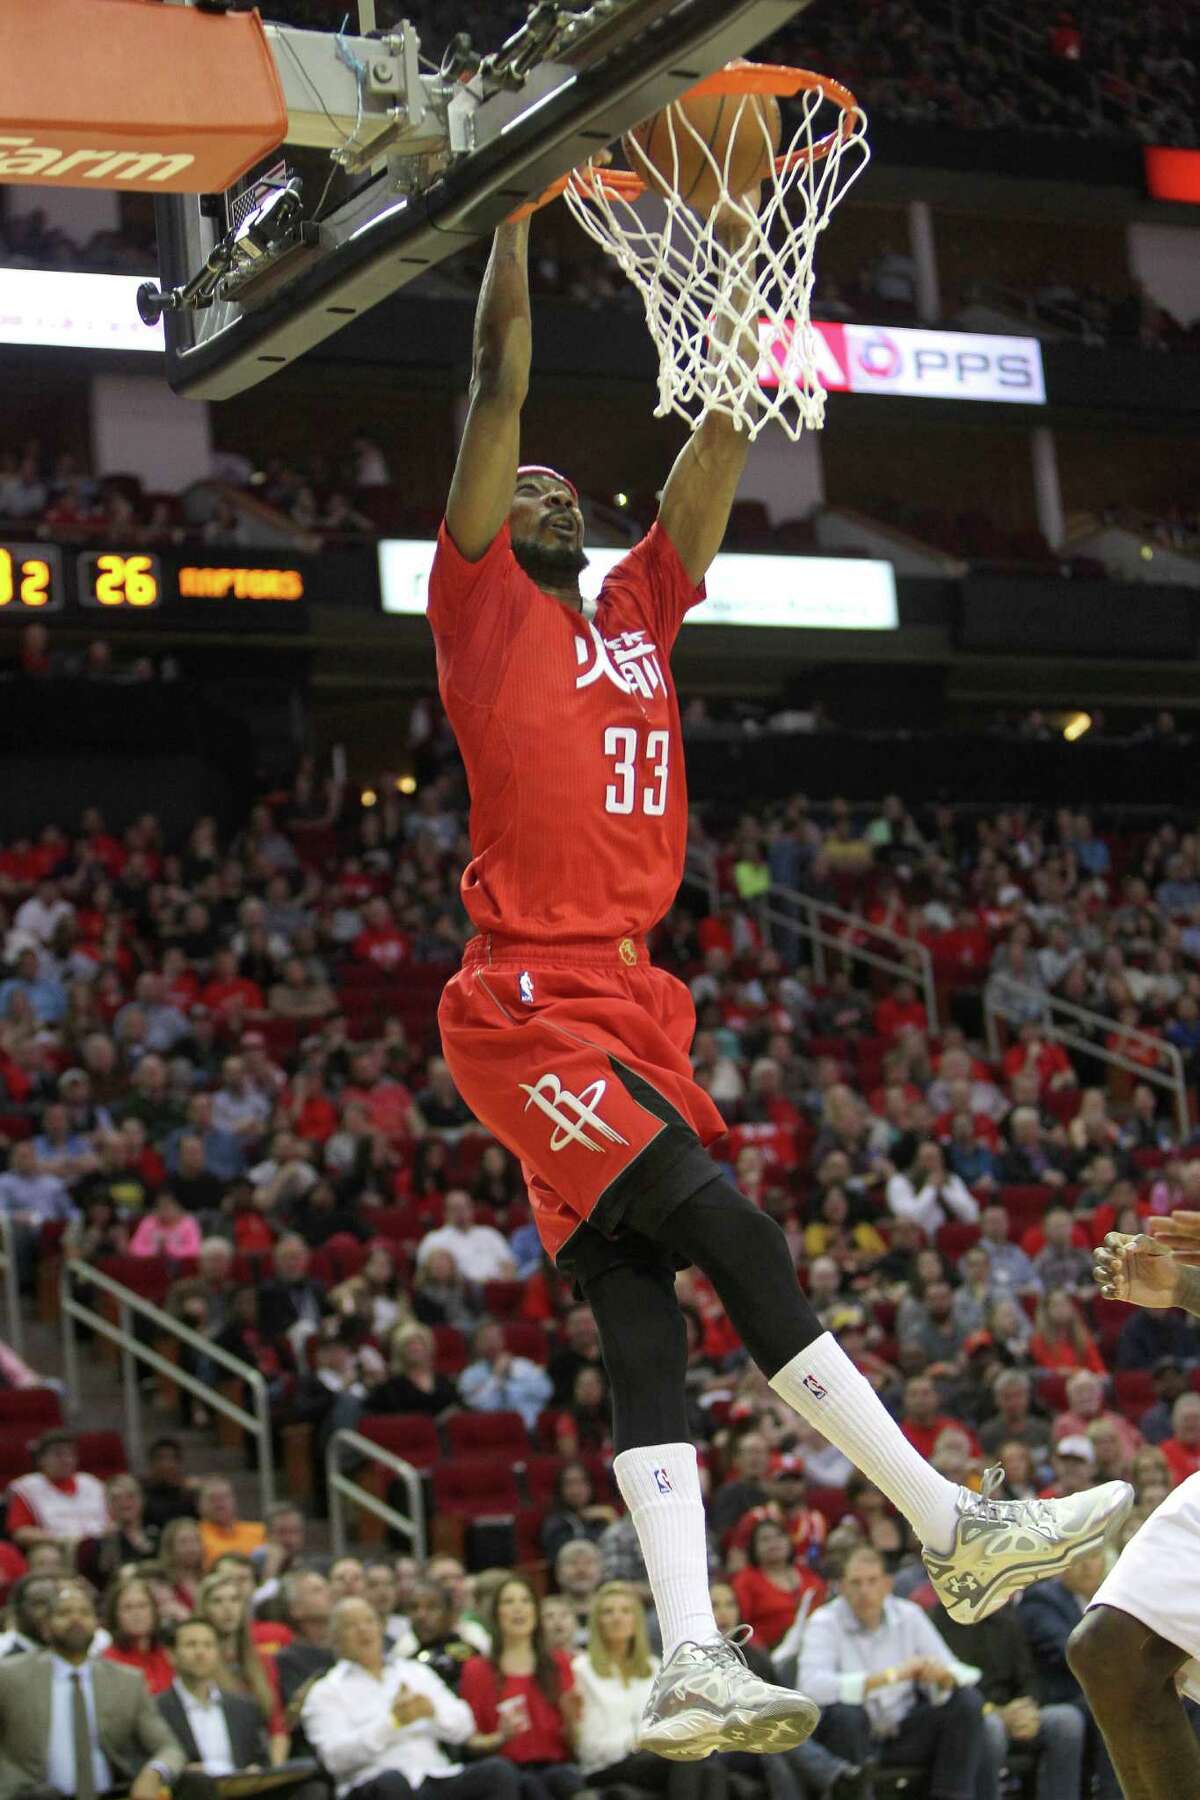 New Rockets Pablo Prigioni and KJ McDaniels watched as guard Corey Brewer, who came to Houston in a trade earlier this season, poured in 26 points to lead Houston past Toronto on Saturday night at Toyota Center.